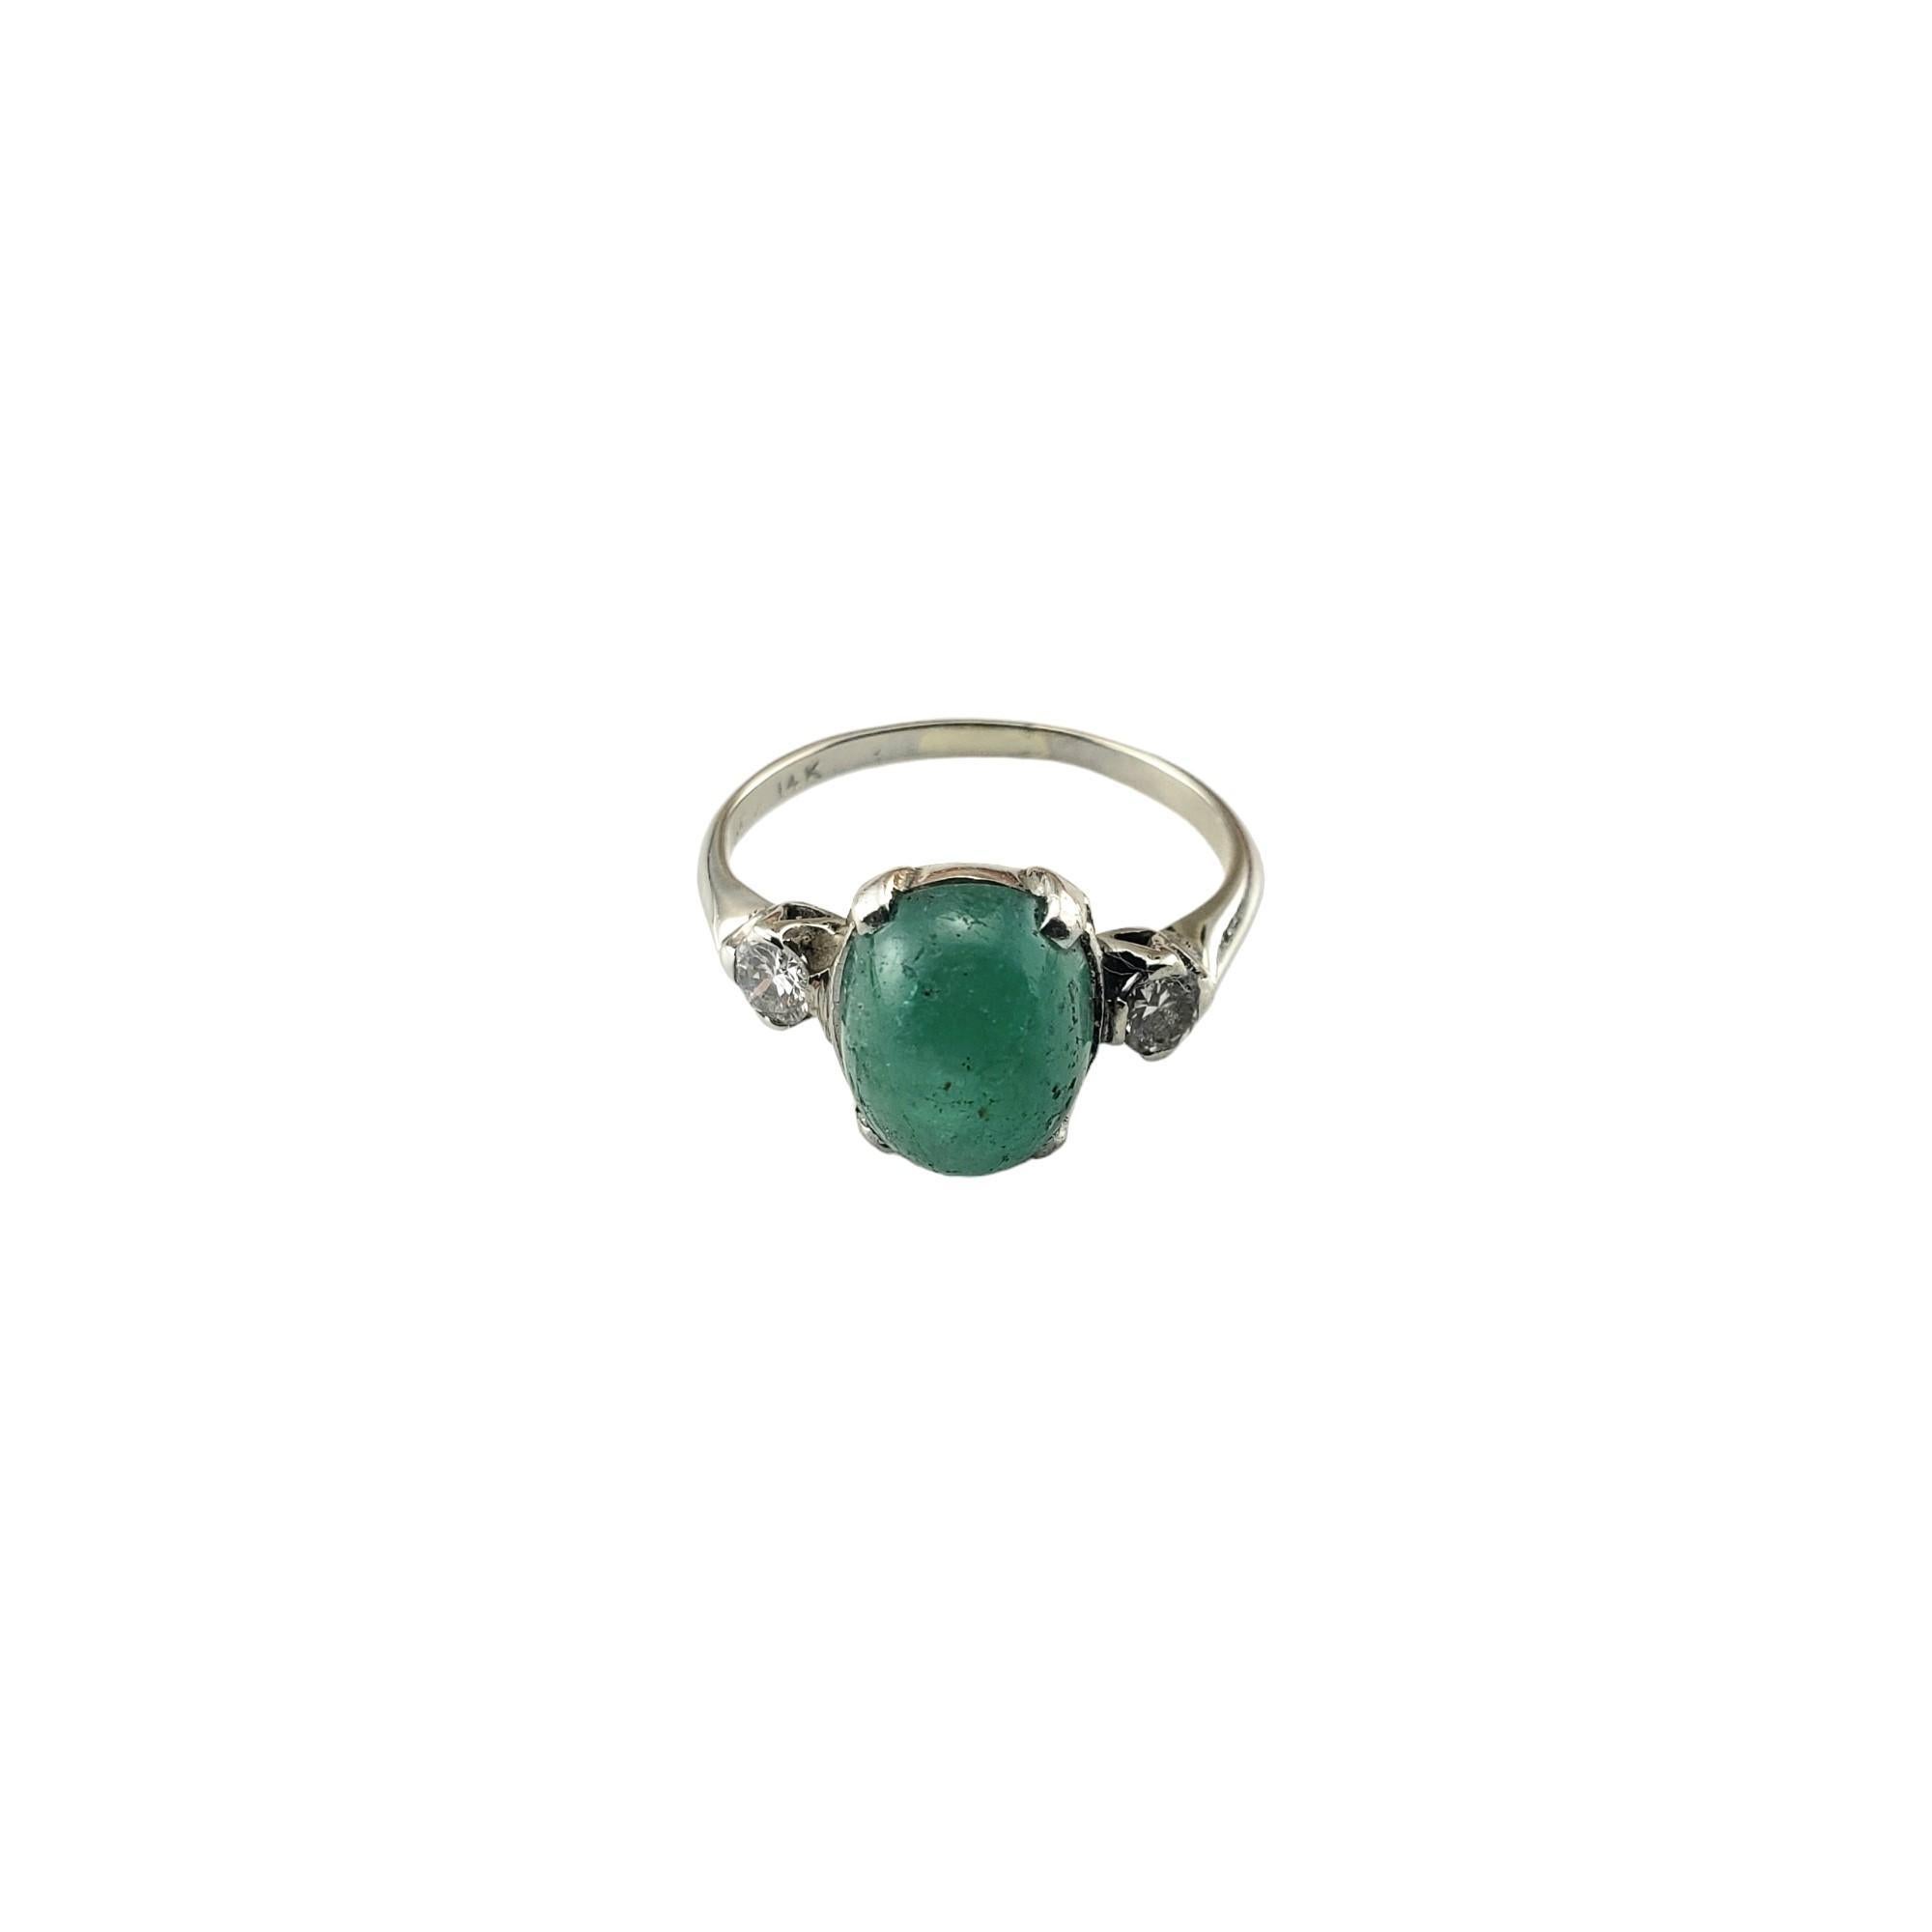 Vintage 14 Karat White Gold Emerald and Diamond Ring Size 4.5 JAGi Certified-

This elegant ring features on oval cabochon emerald (8.8 mm x 7.2 mm) and two round brilliant cut diamonds set in classic 14K white gold.  Shank: 1.4 mm.

Emerald weight: